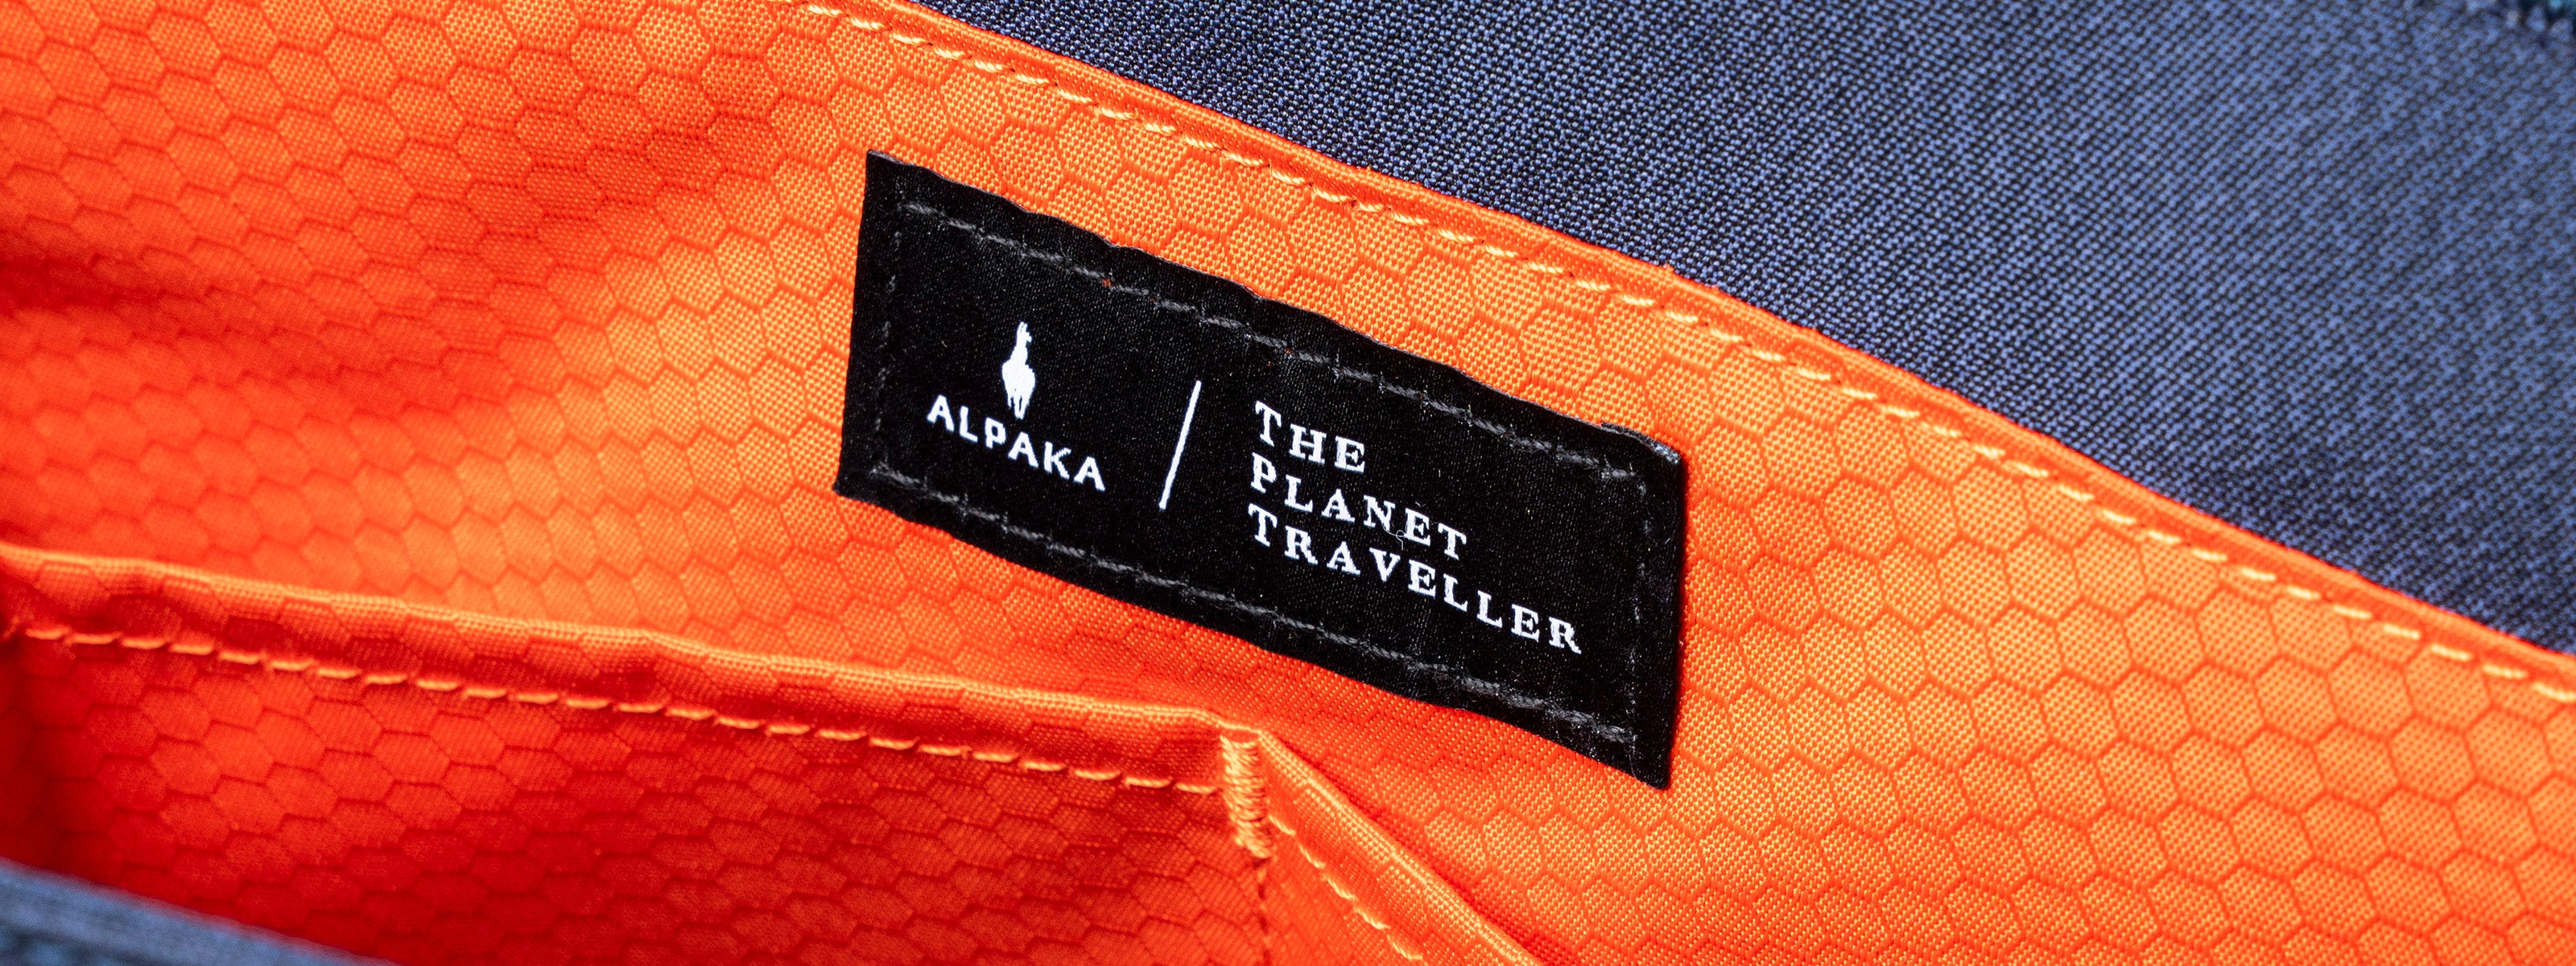 ALPAKA x The Planet Traveller: New Store, New Limited-Edition Tote